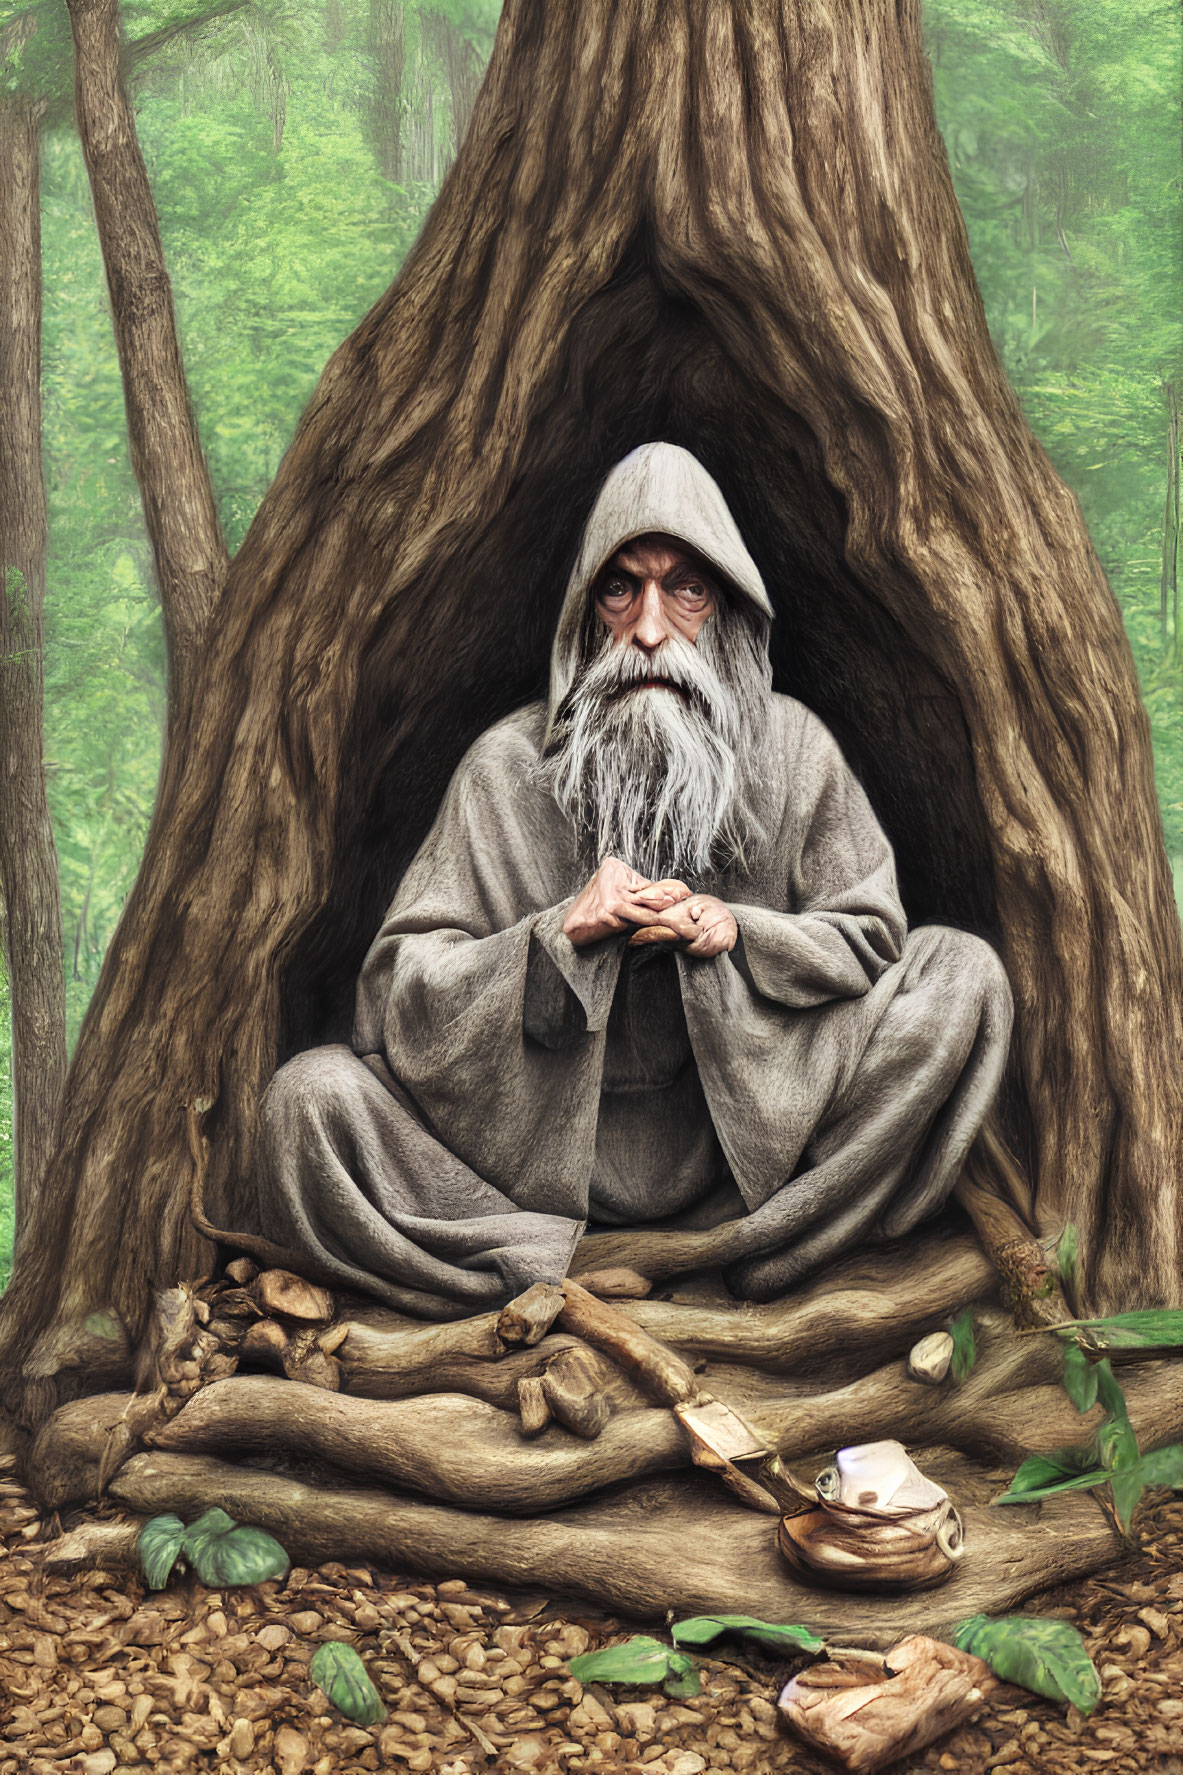 Elderly bearded man in grey cloak meditates in hollow tree with simple meal